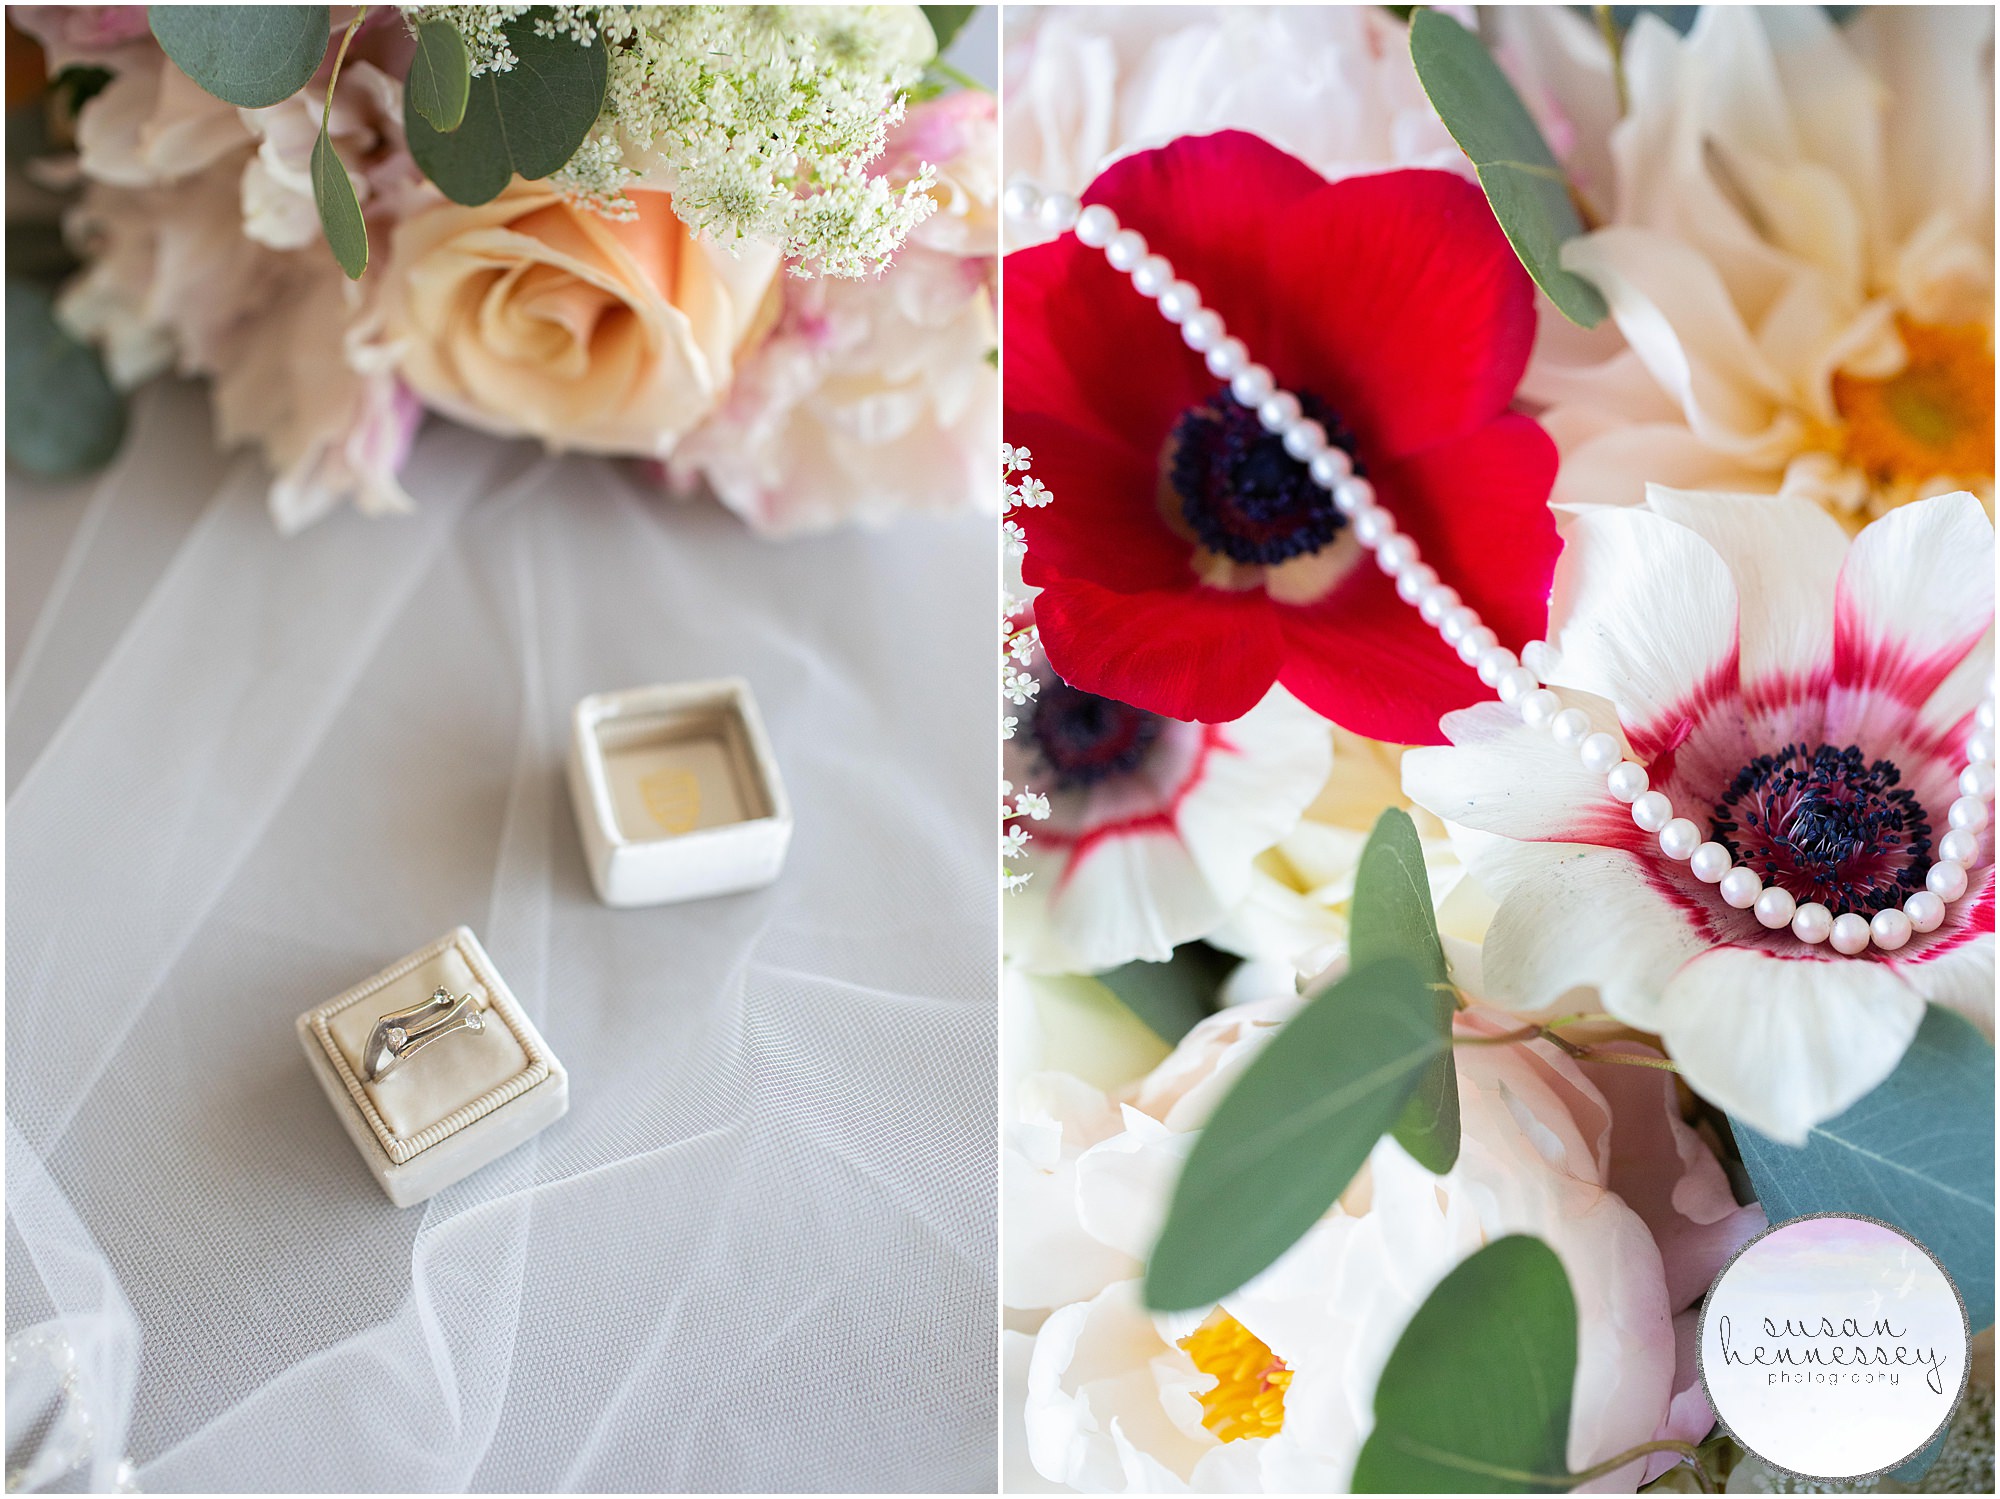 Heirloom ring sitting in a Mrs Box and vintage pearl necklace are bride's wedding day jewelry.